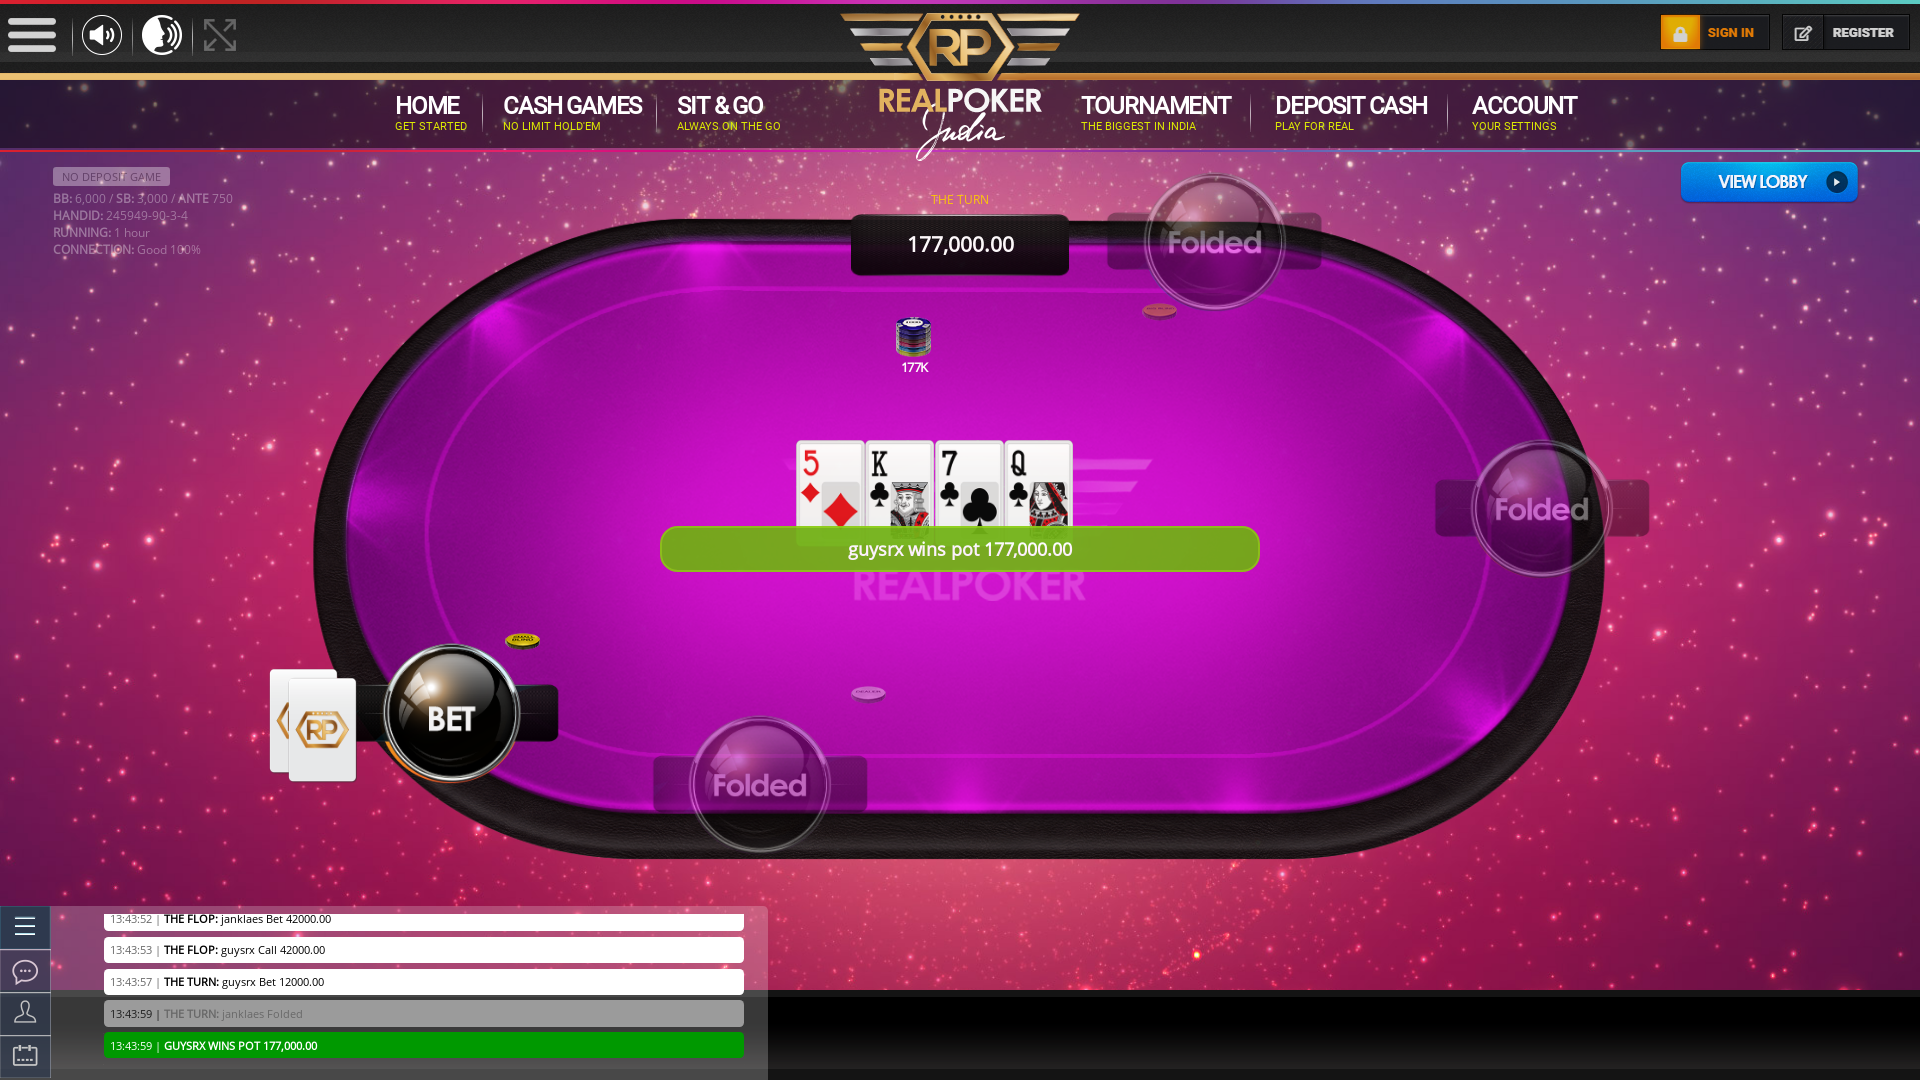 Indian poker on a 10 player table in the 78th minute